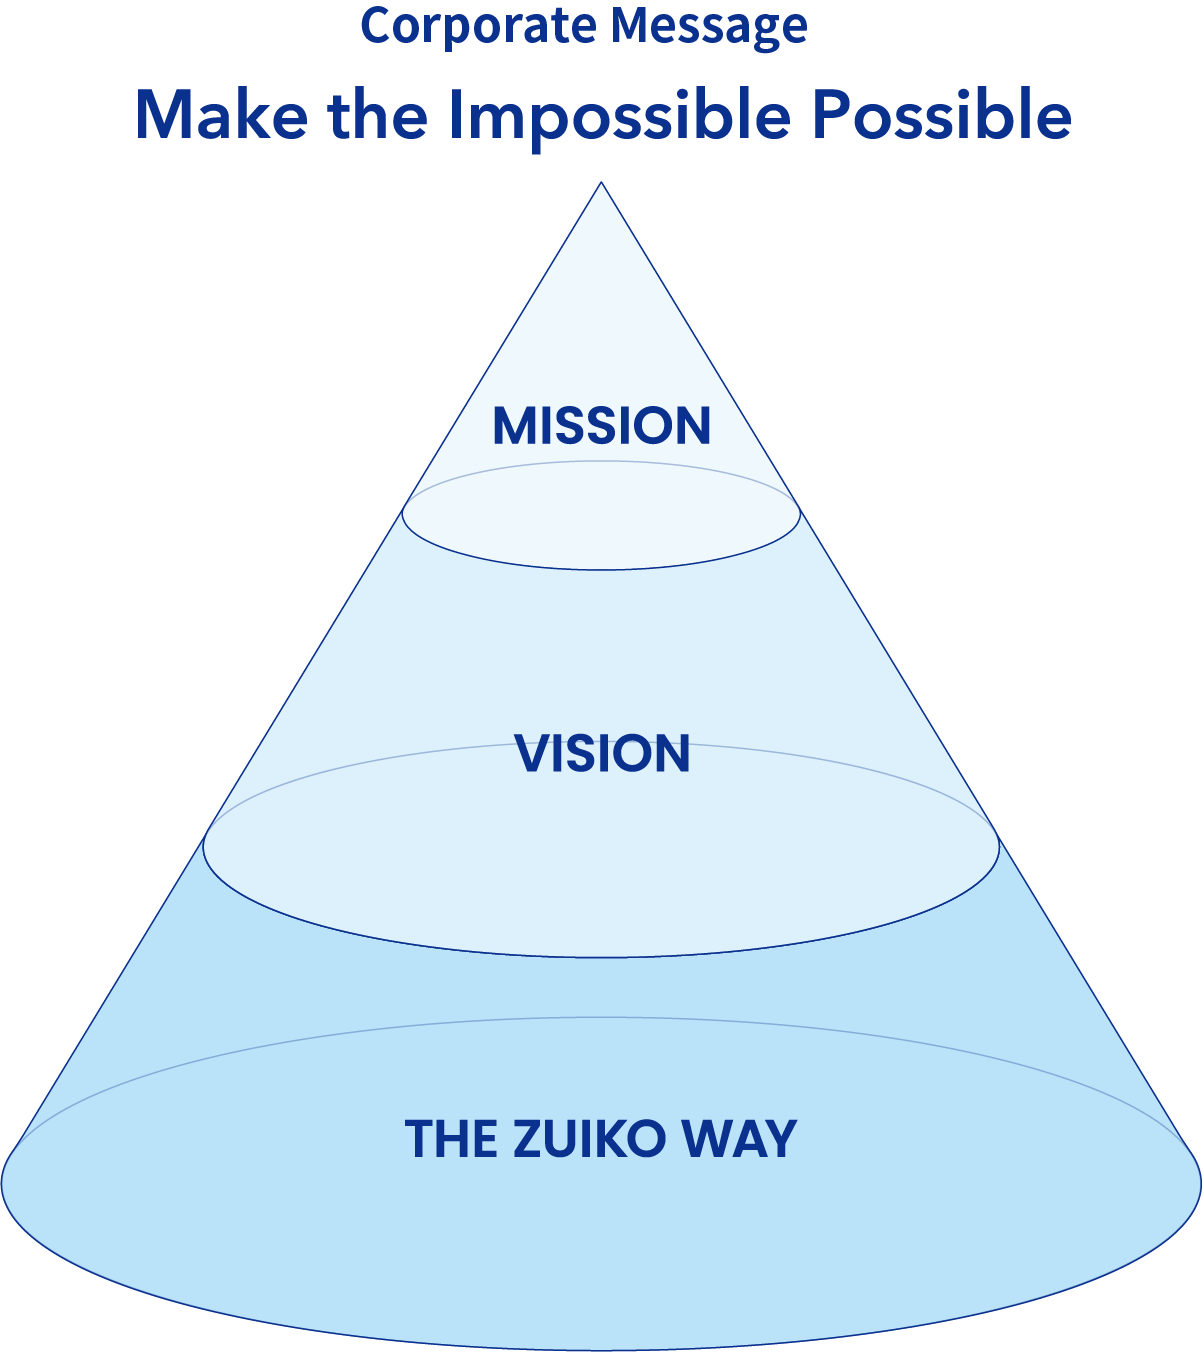 Corporate Message「Make the Impossible Possible」